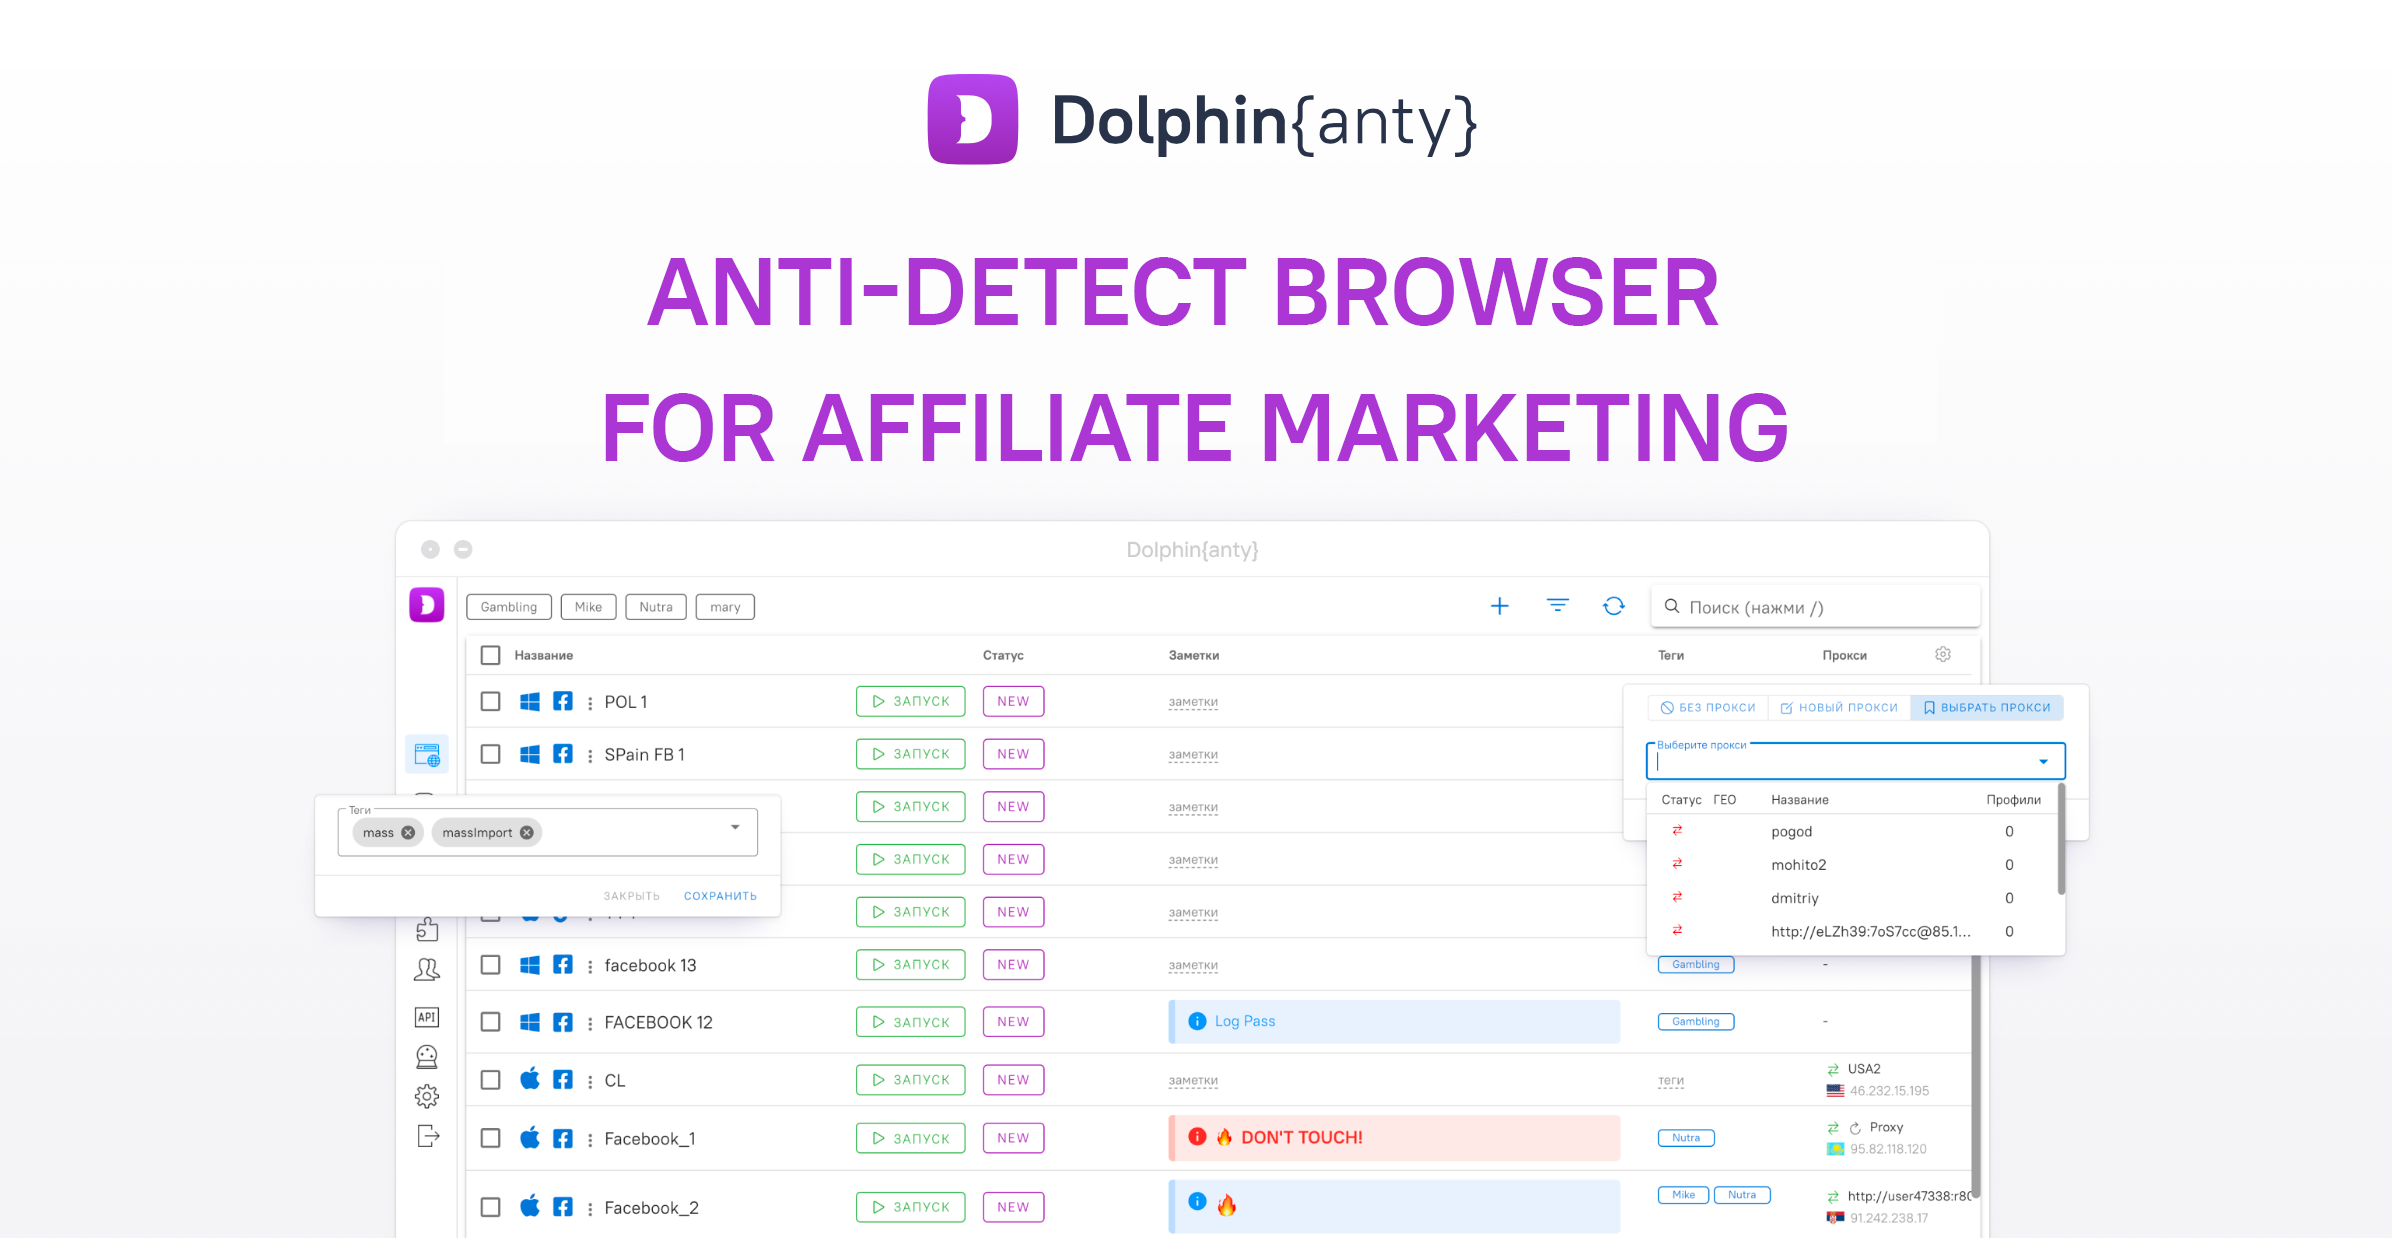 Dolphin anty for affiliate marketing